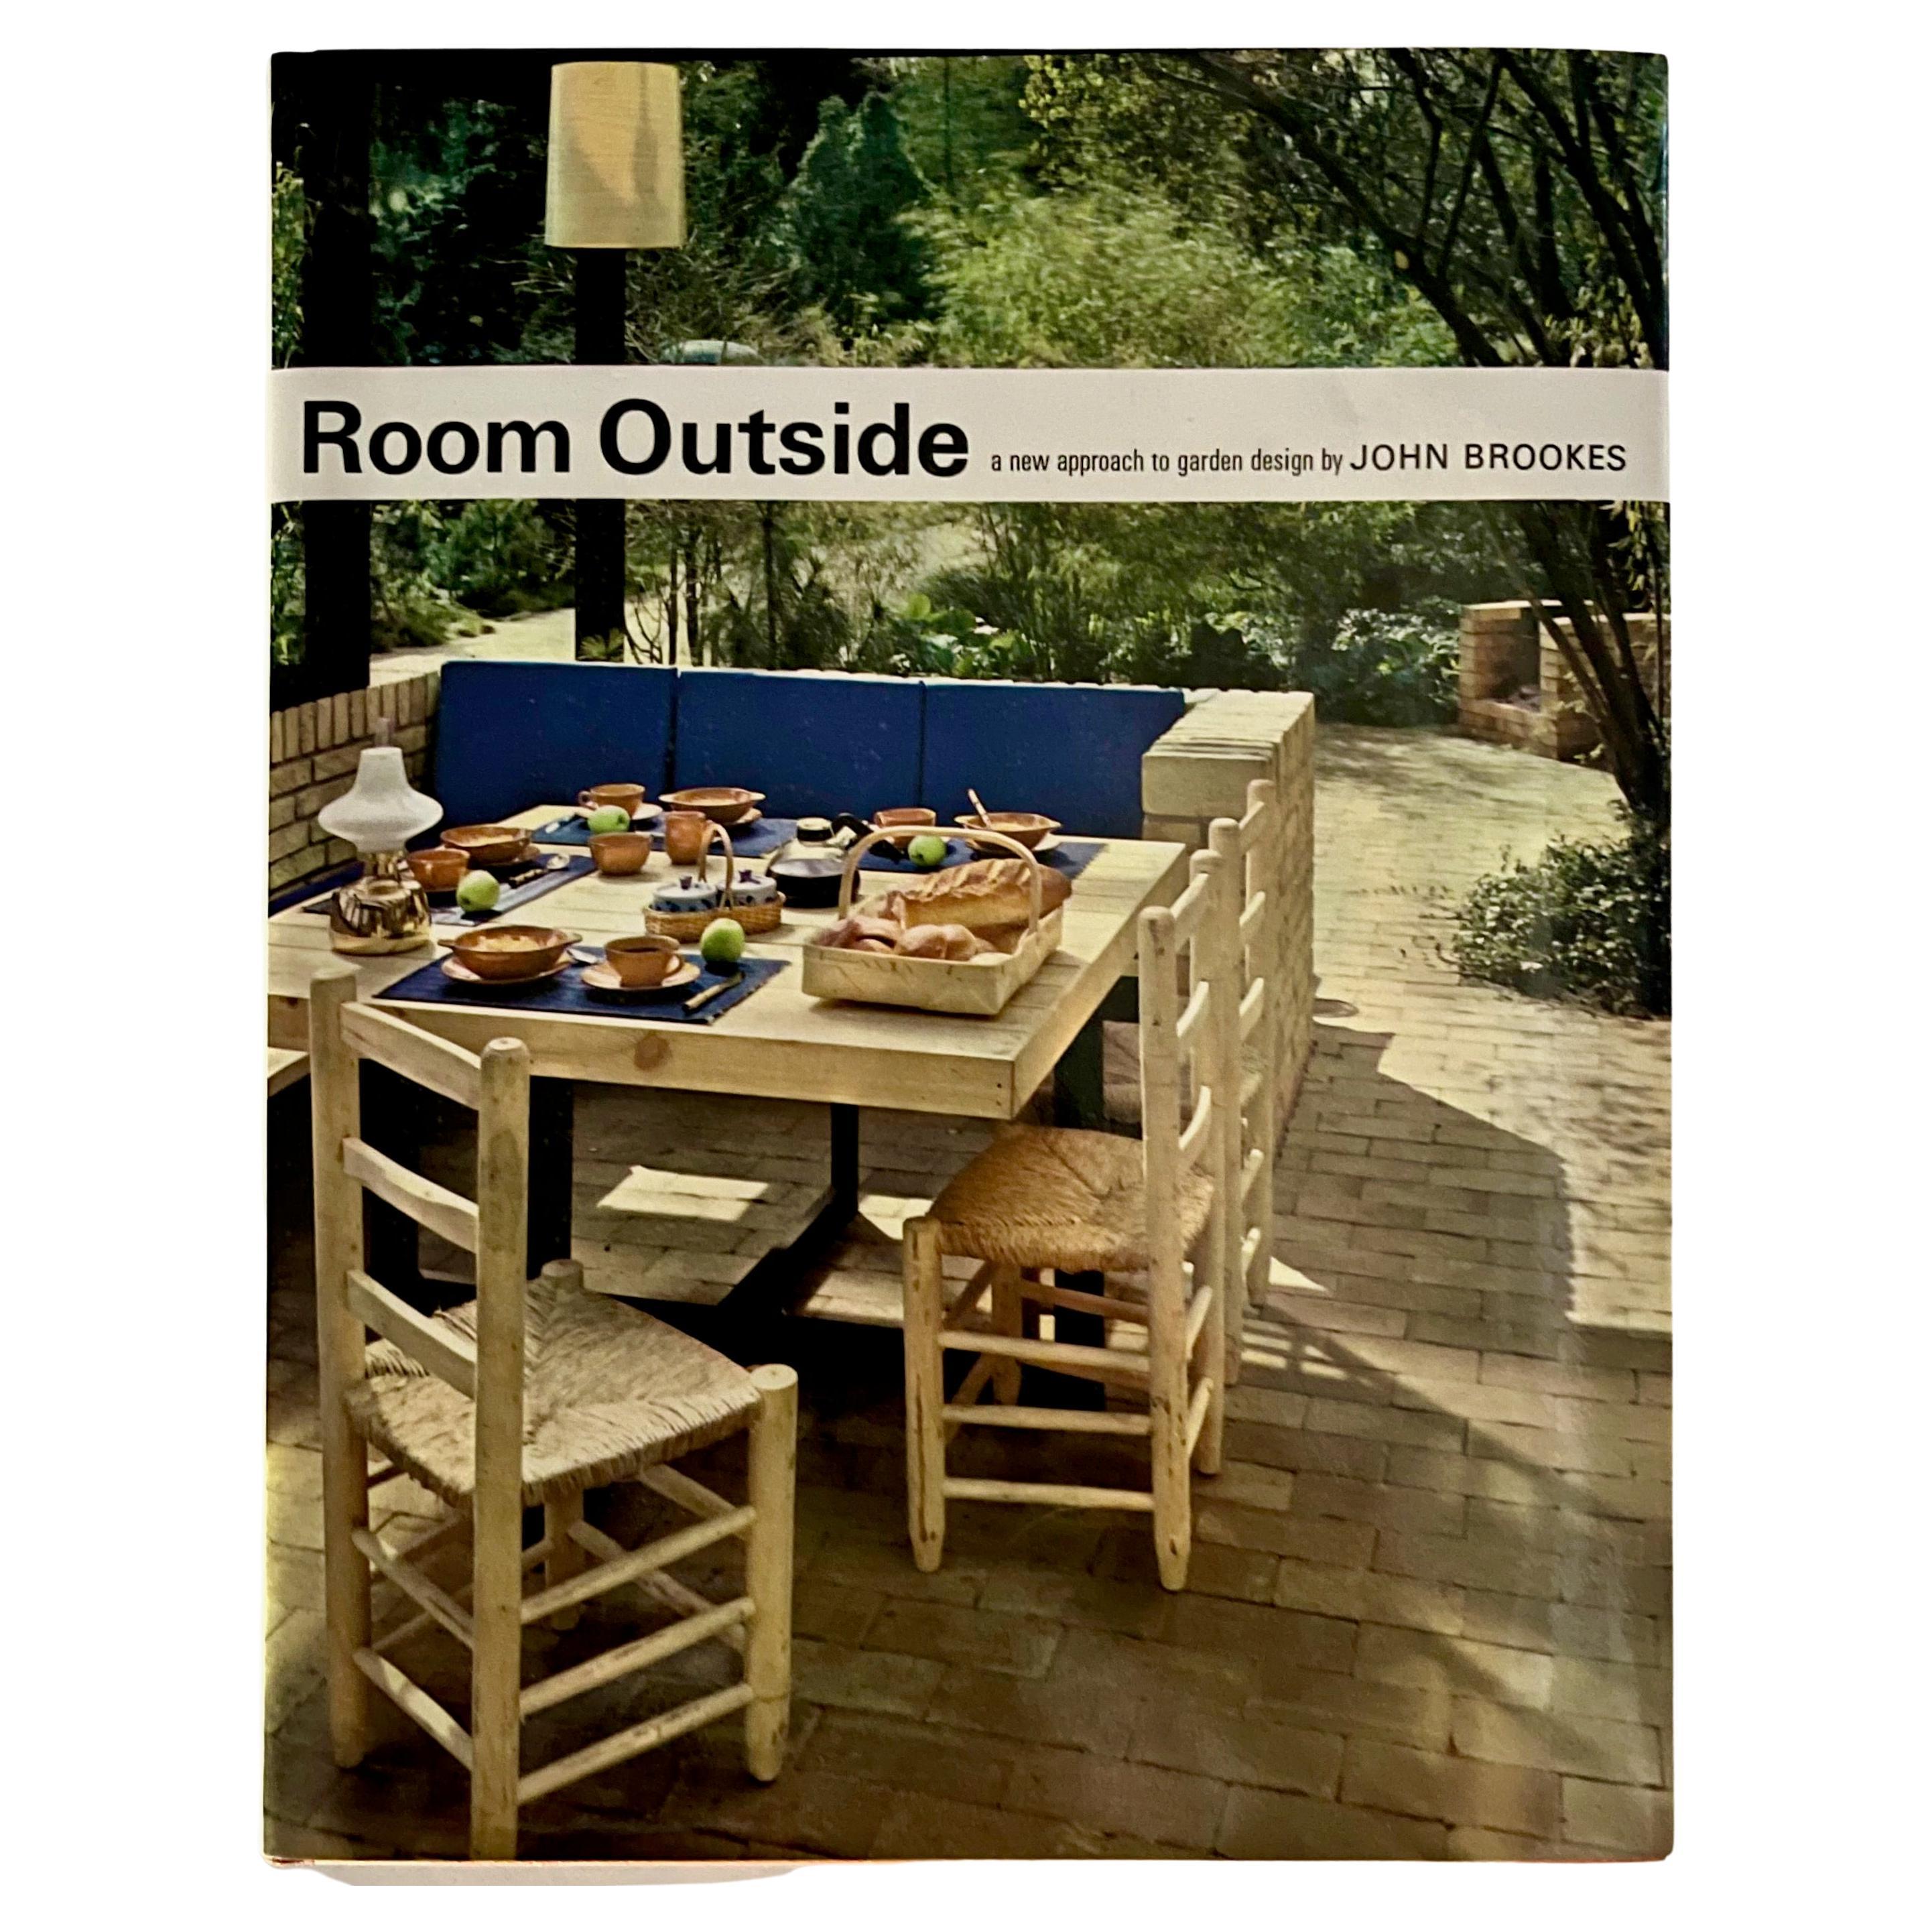 Room Outside: A New Approach to Garden Design - John Brookes - 1st Ed, T&H, 1969 For Sale